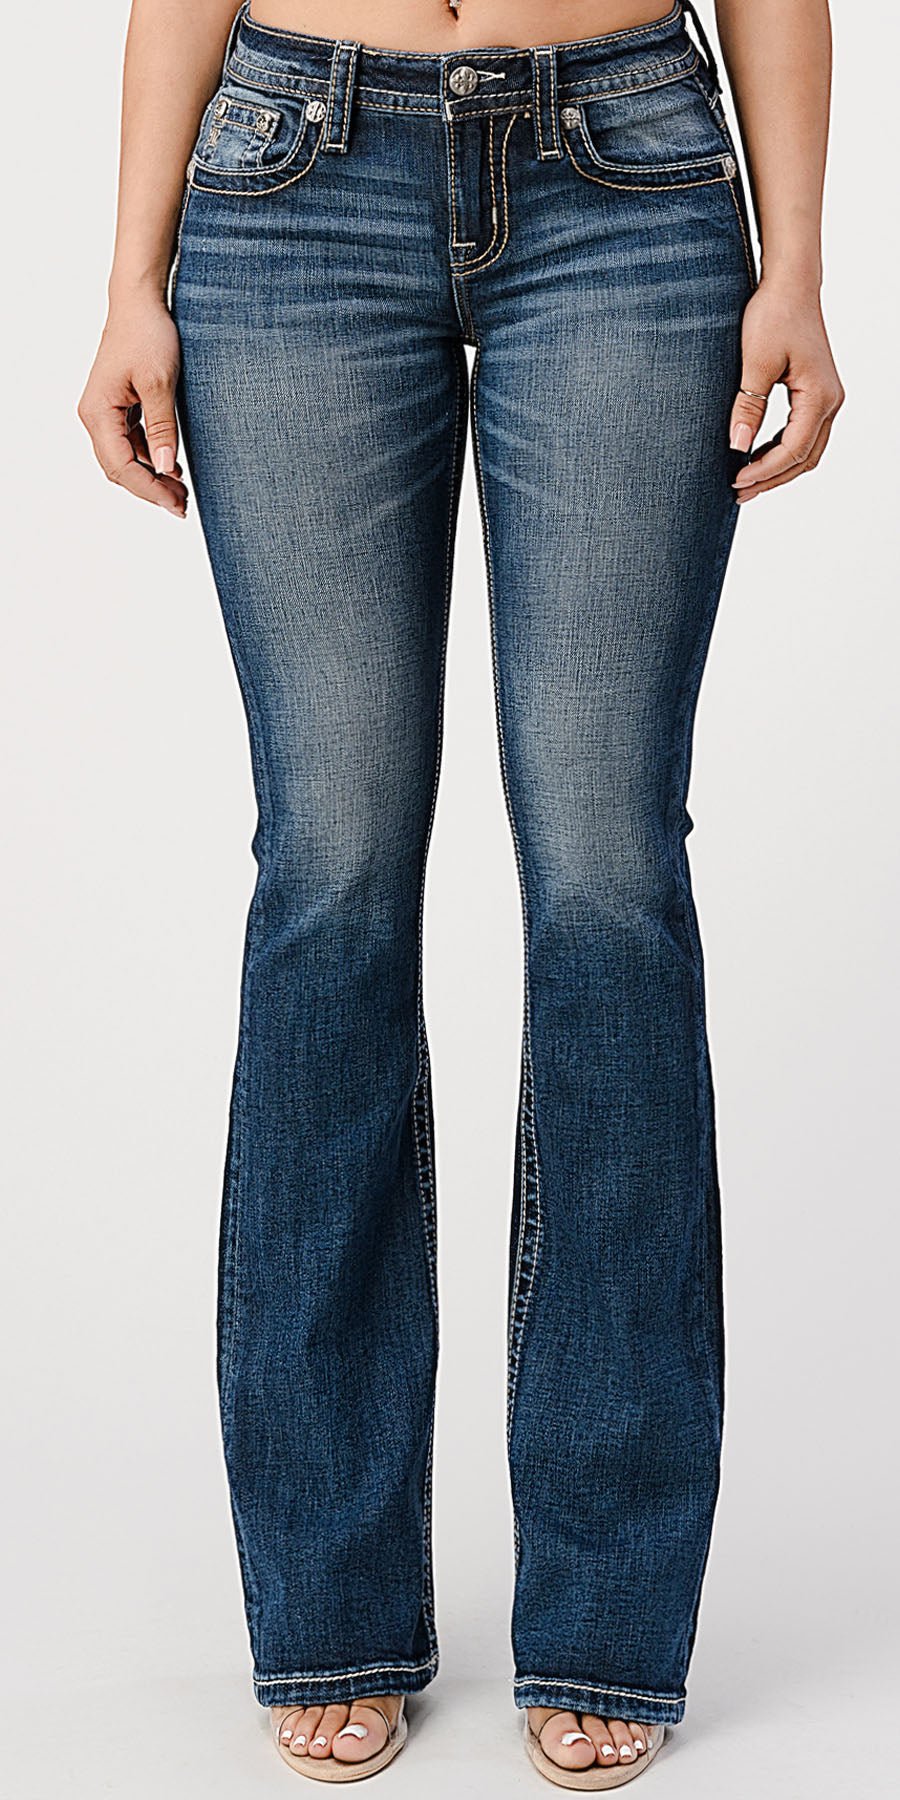 K1194 Twist It Up Bootcut Jeans X-Shaped Mid Rise Bootcut